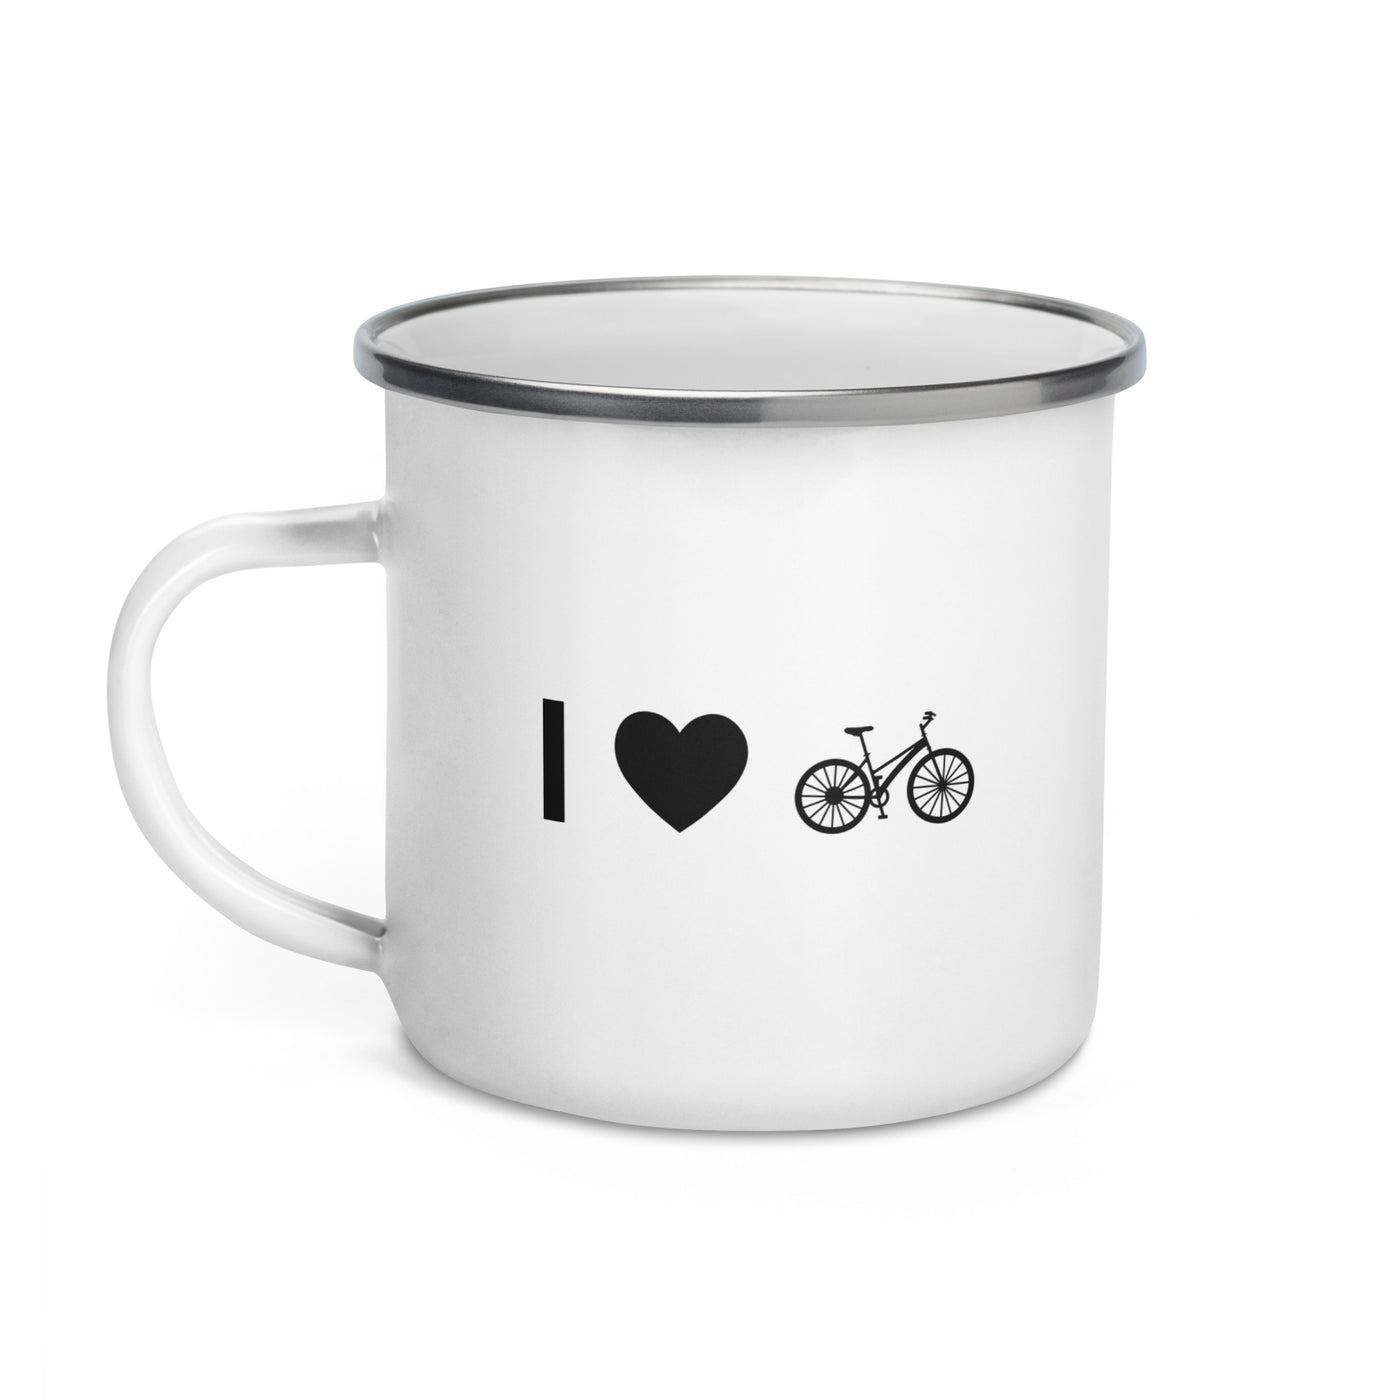 I Heart And Cycling - Emaille Tasse fahrrad